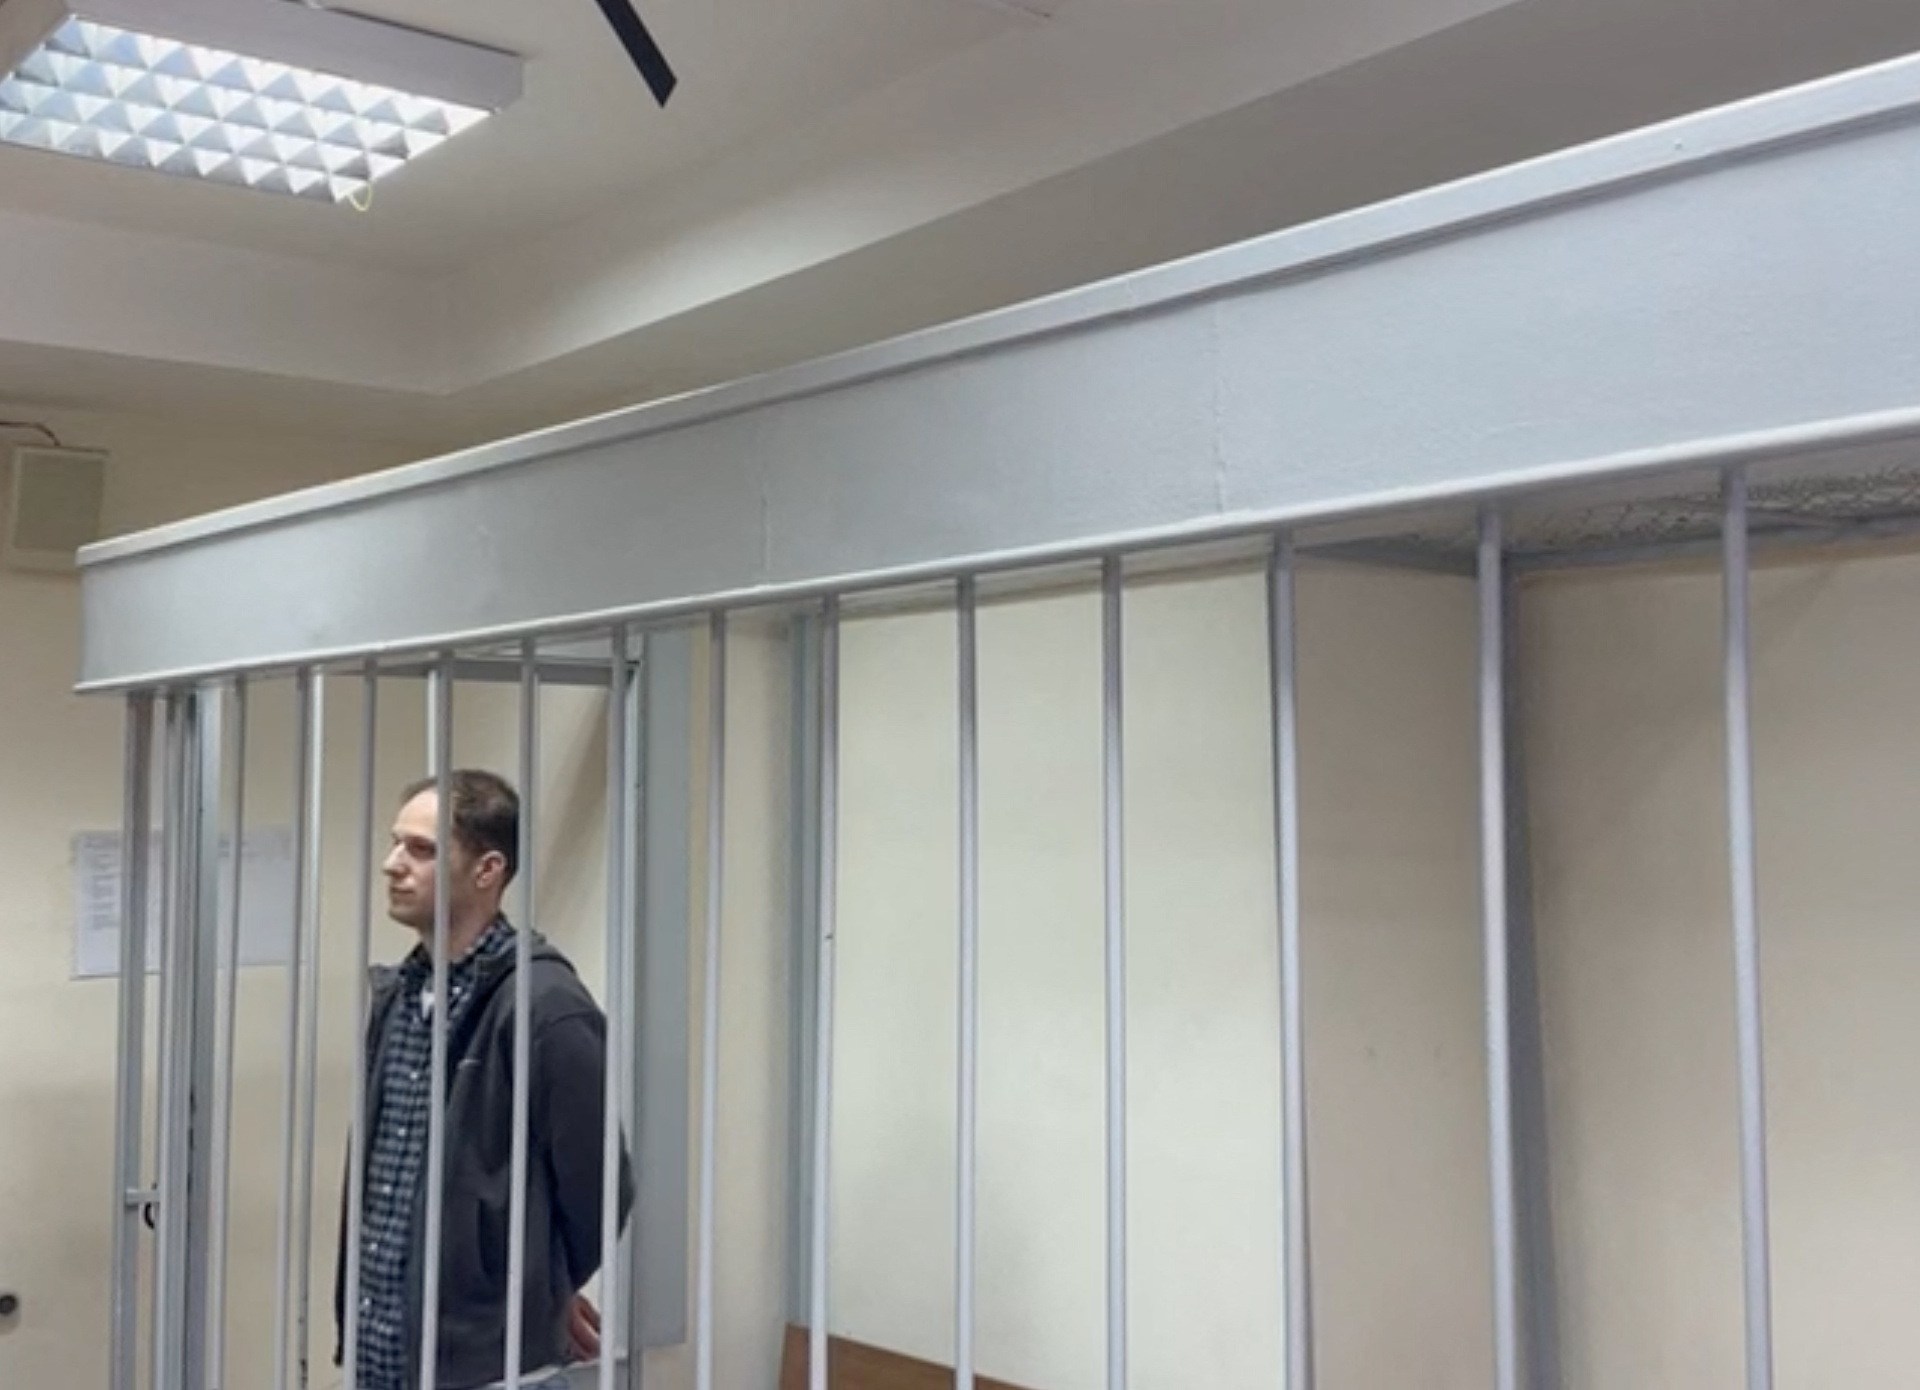 Russian court extends detention of WSJ reporter Evan Gershkovich | Freedom of the Press News #Russian #court #extends #detention #WSJ #reporter #Evan #Gershkovich #Freedom #Press #News